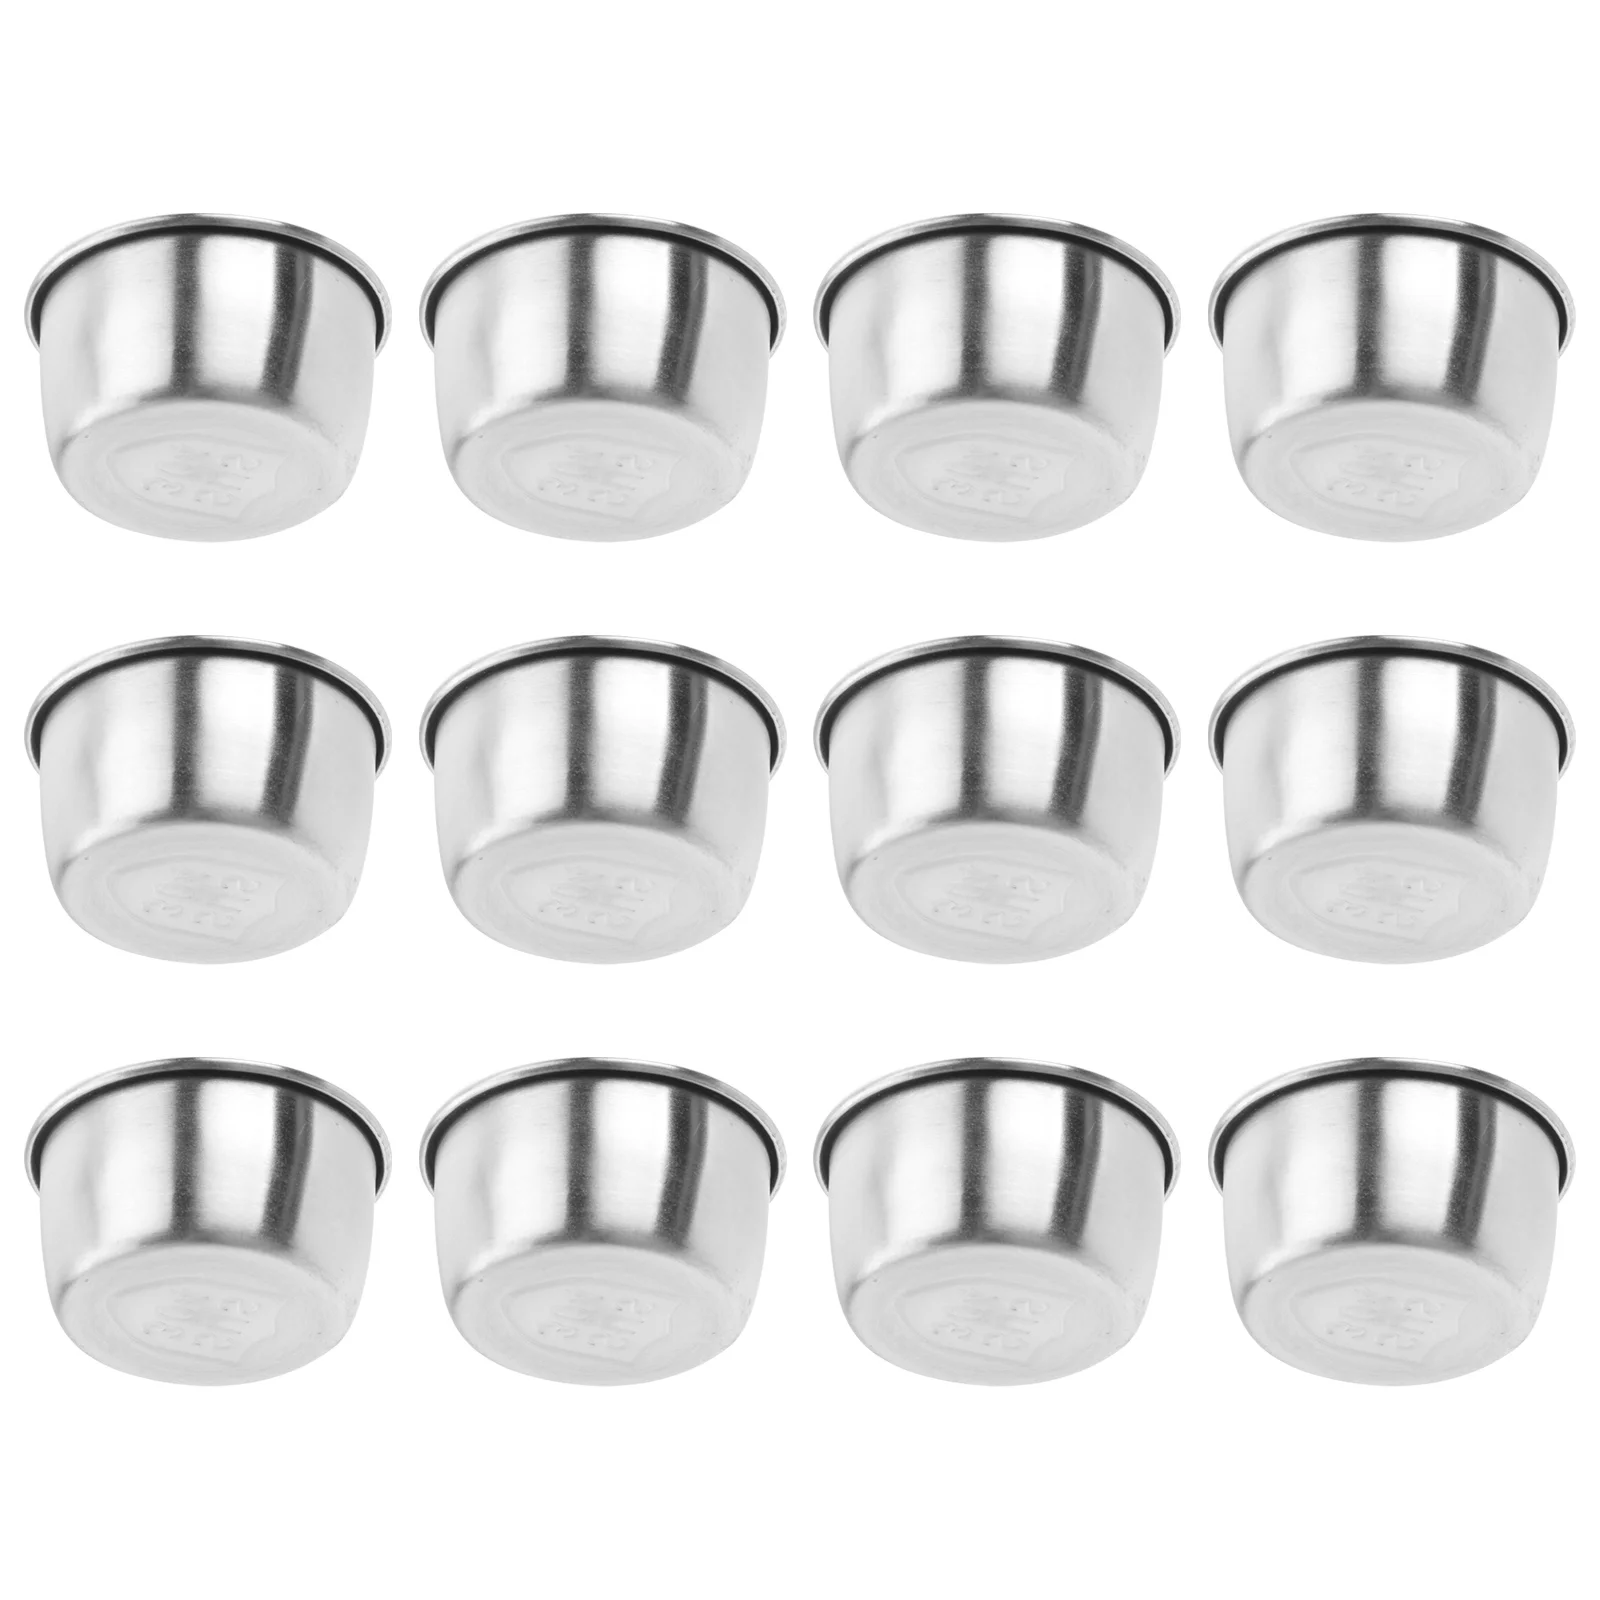 

12 Pcs Dipping Sauce Dish Ice Cream Containers Serving Bowls Appetizer Plates Circle Tray Sampling Cup Round Condiment Side Mini